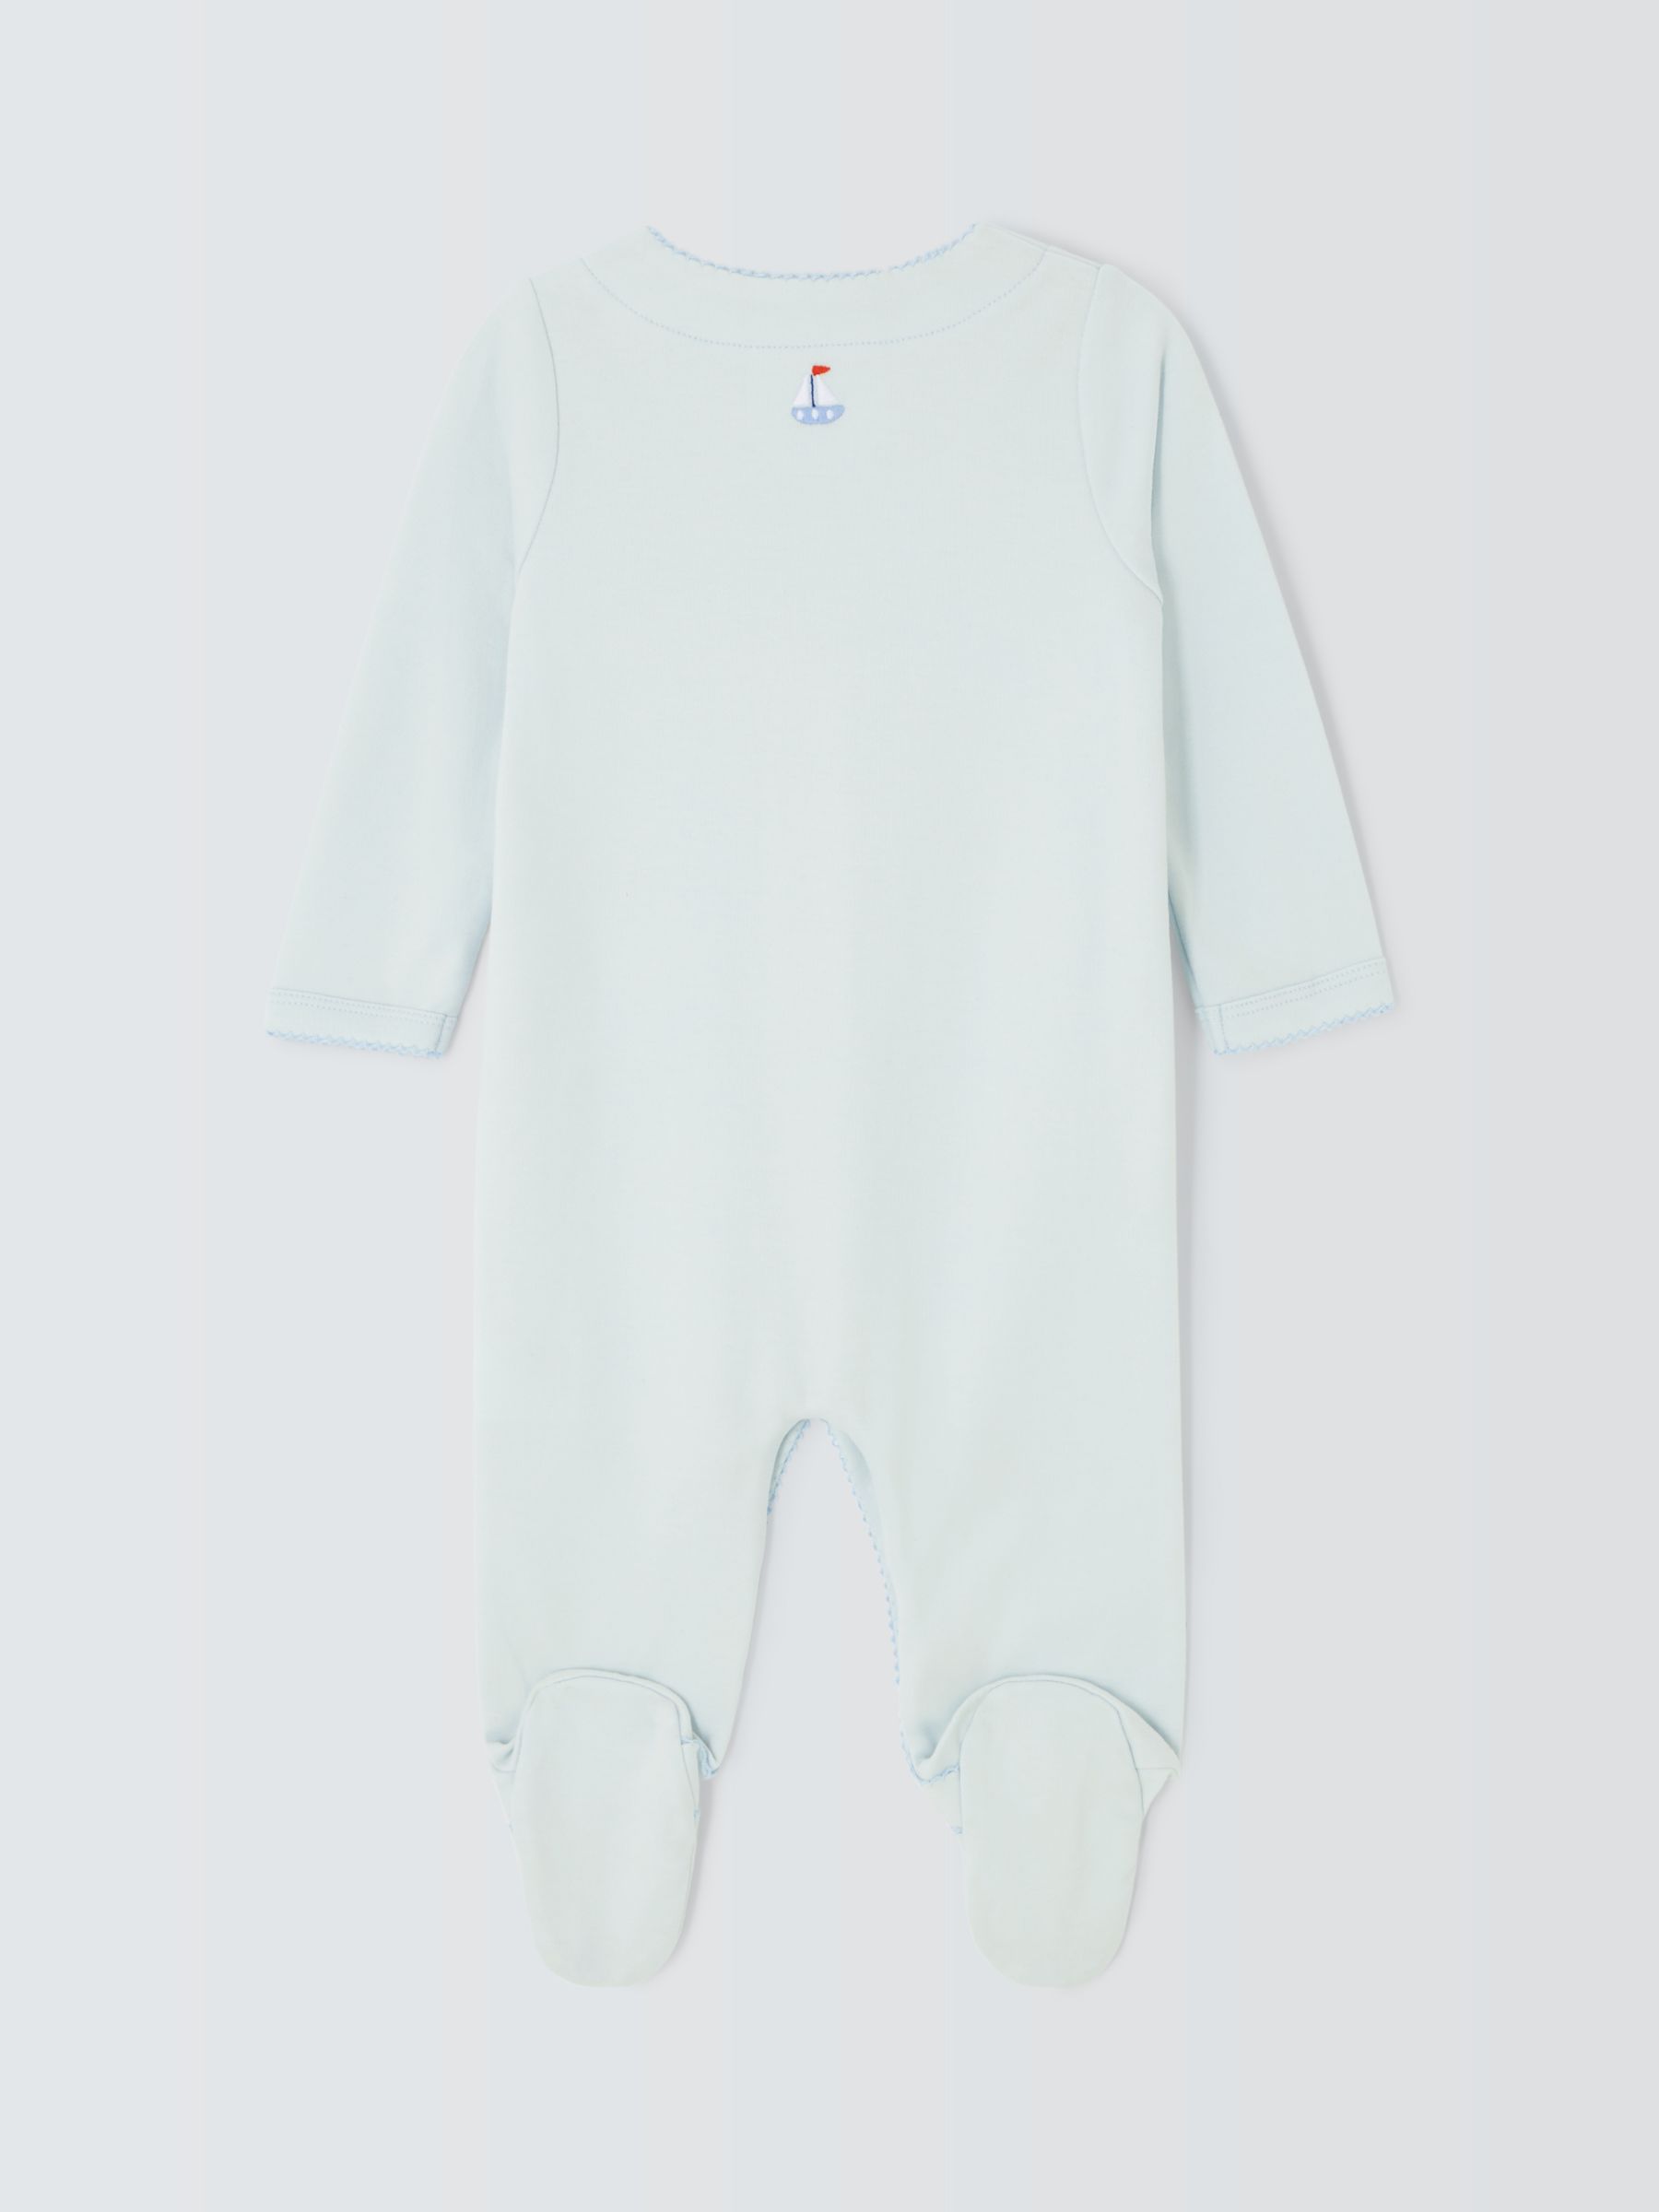 John Lewis Heirloom Collection Baby Transport Toys Embroidered Pima Cotton Sleepsuit, Blue, 3-6 months